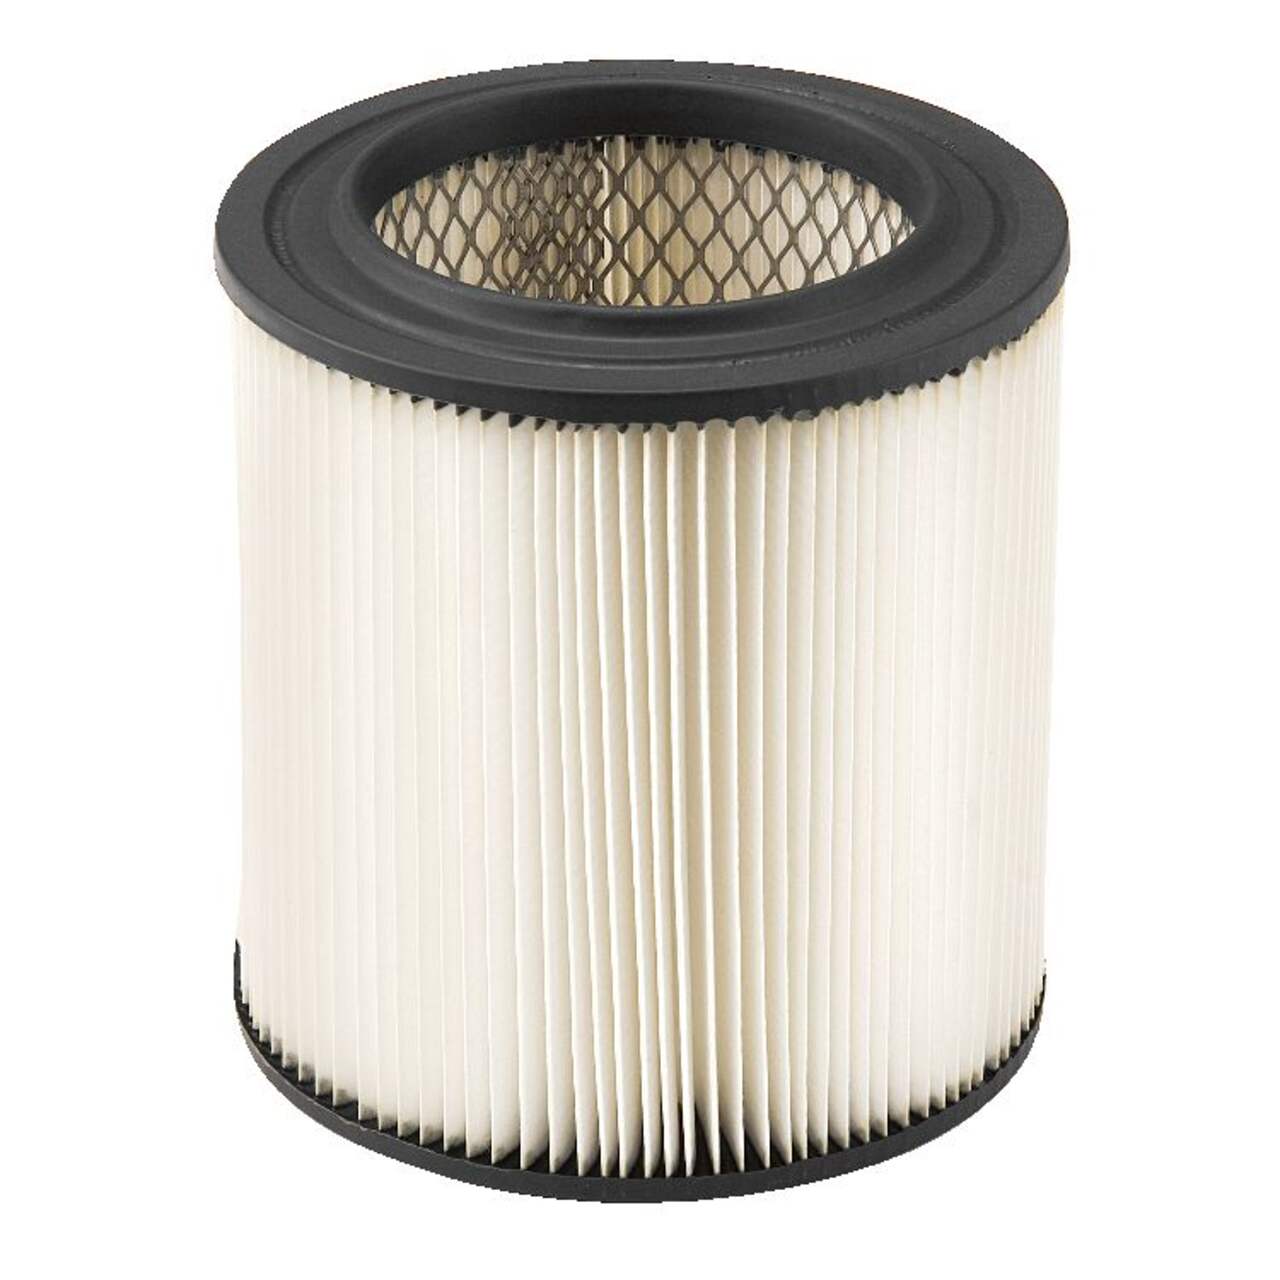  MisterVac compatible with filter replacement filter